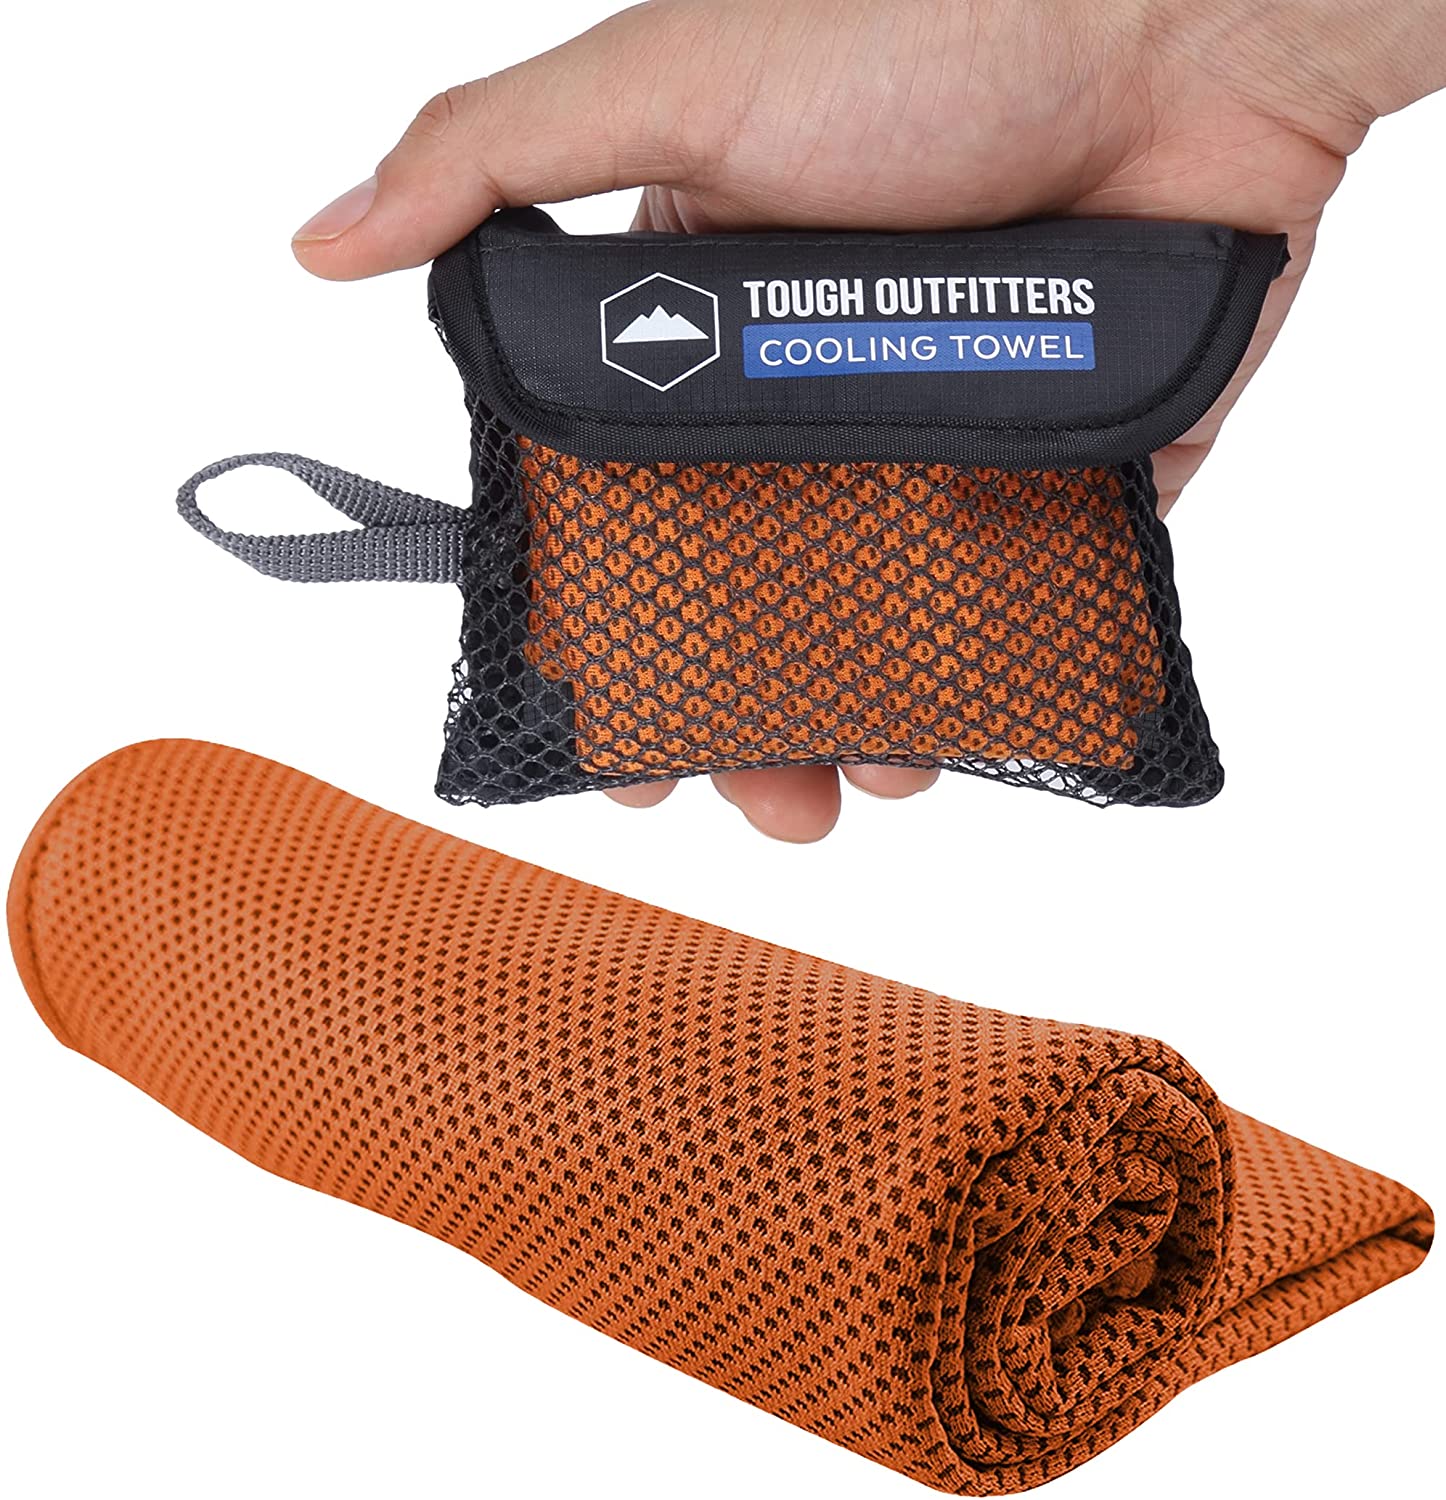 Cooling Towels | Unique Stocking Stuffers | Amazon Stocking Stuffers | Stocking stuffers For Adults | stocking stuffers for men | mens stocking stuffers | Stocking stuffers for her | Stocking stuffers for guys | Cheap stocking stuffers | Best stocking stuffers | Stocking stuffers for wife | stocking stuffer gifts | Best stocking stuffers